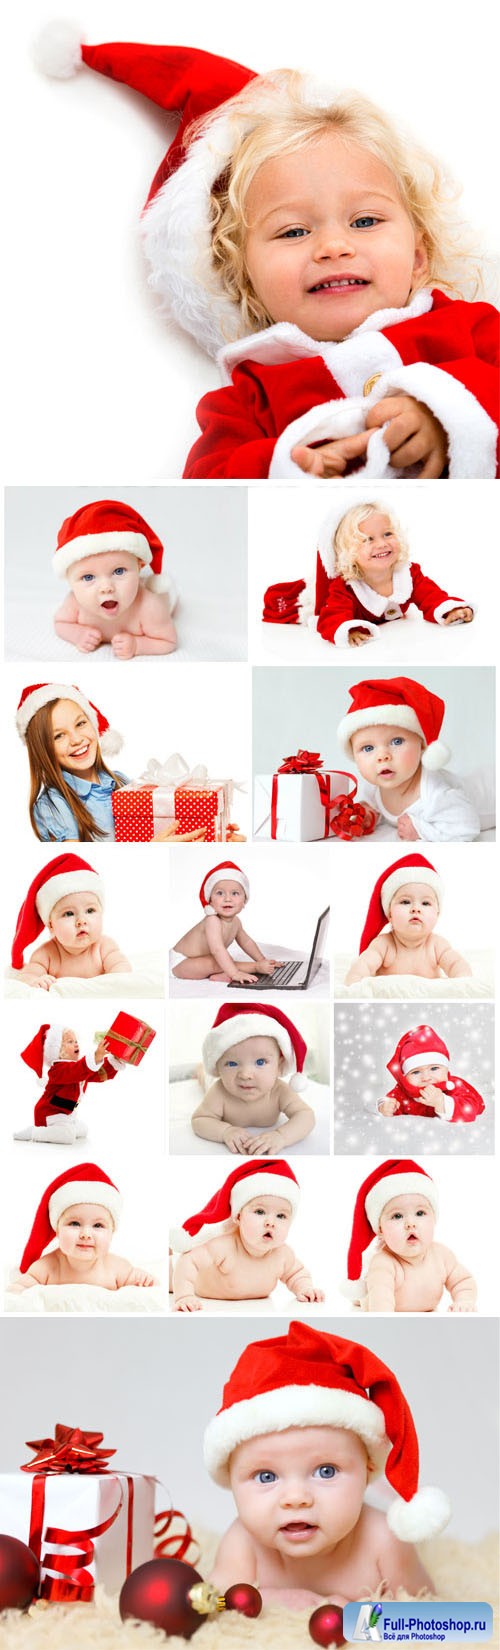 New Year and Christmas stock photos 43